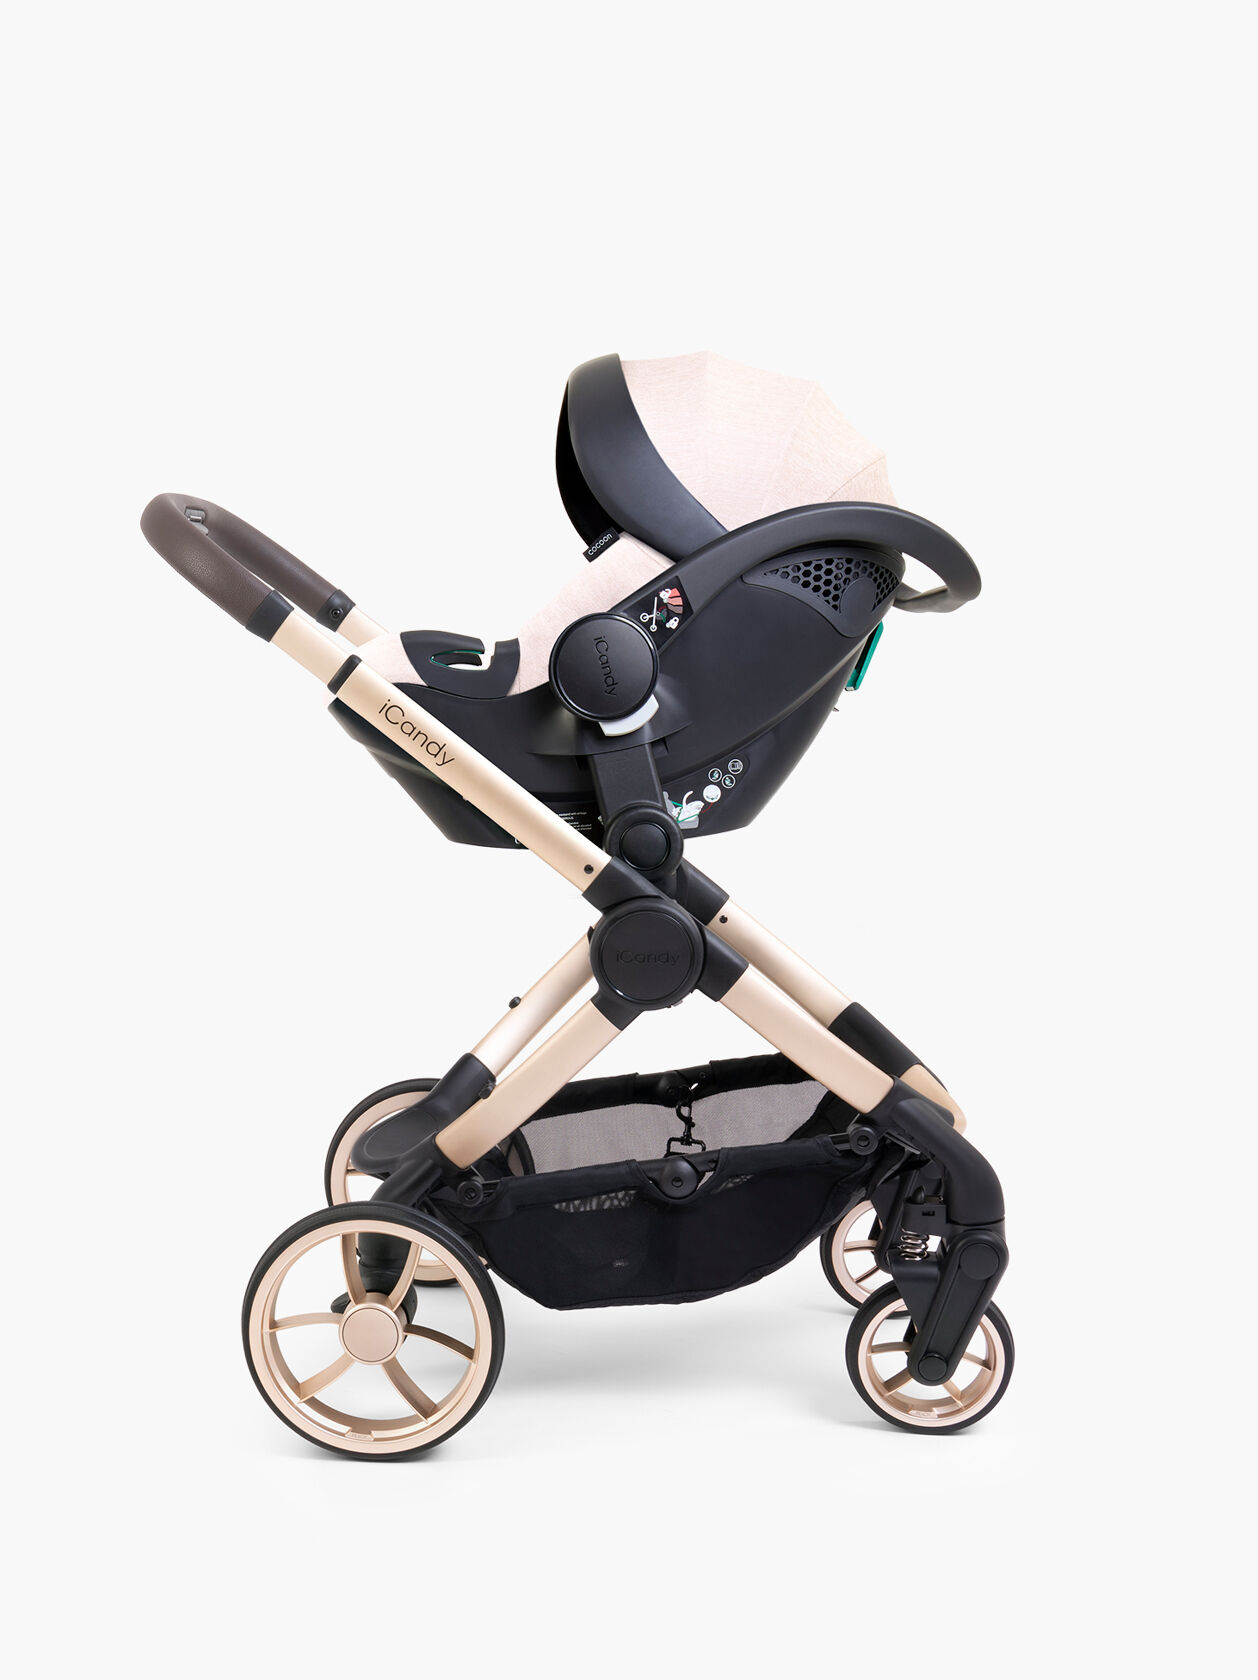 Peach 7 Pushchair and Carrycot - Complete Car Seat Bundle